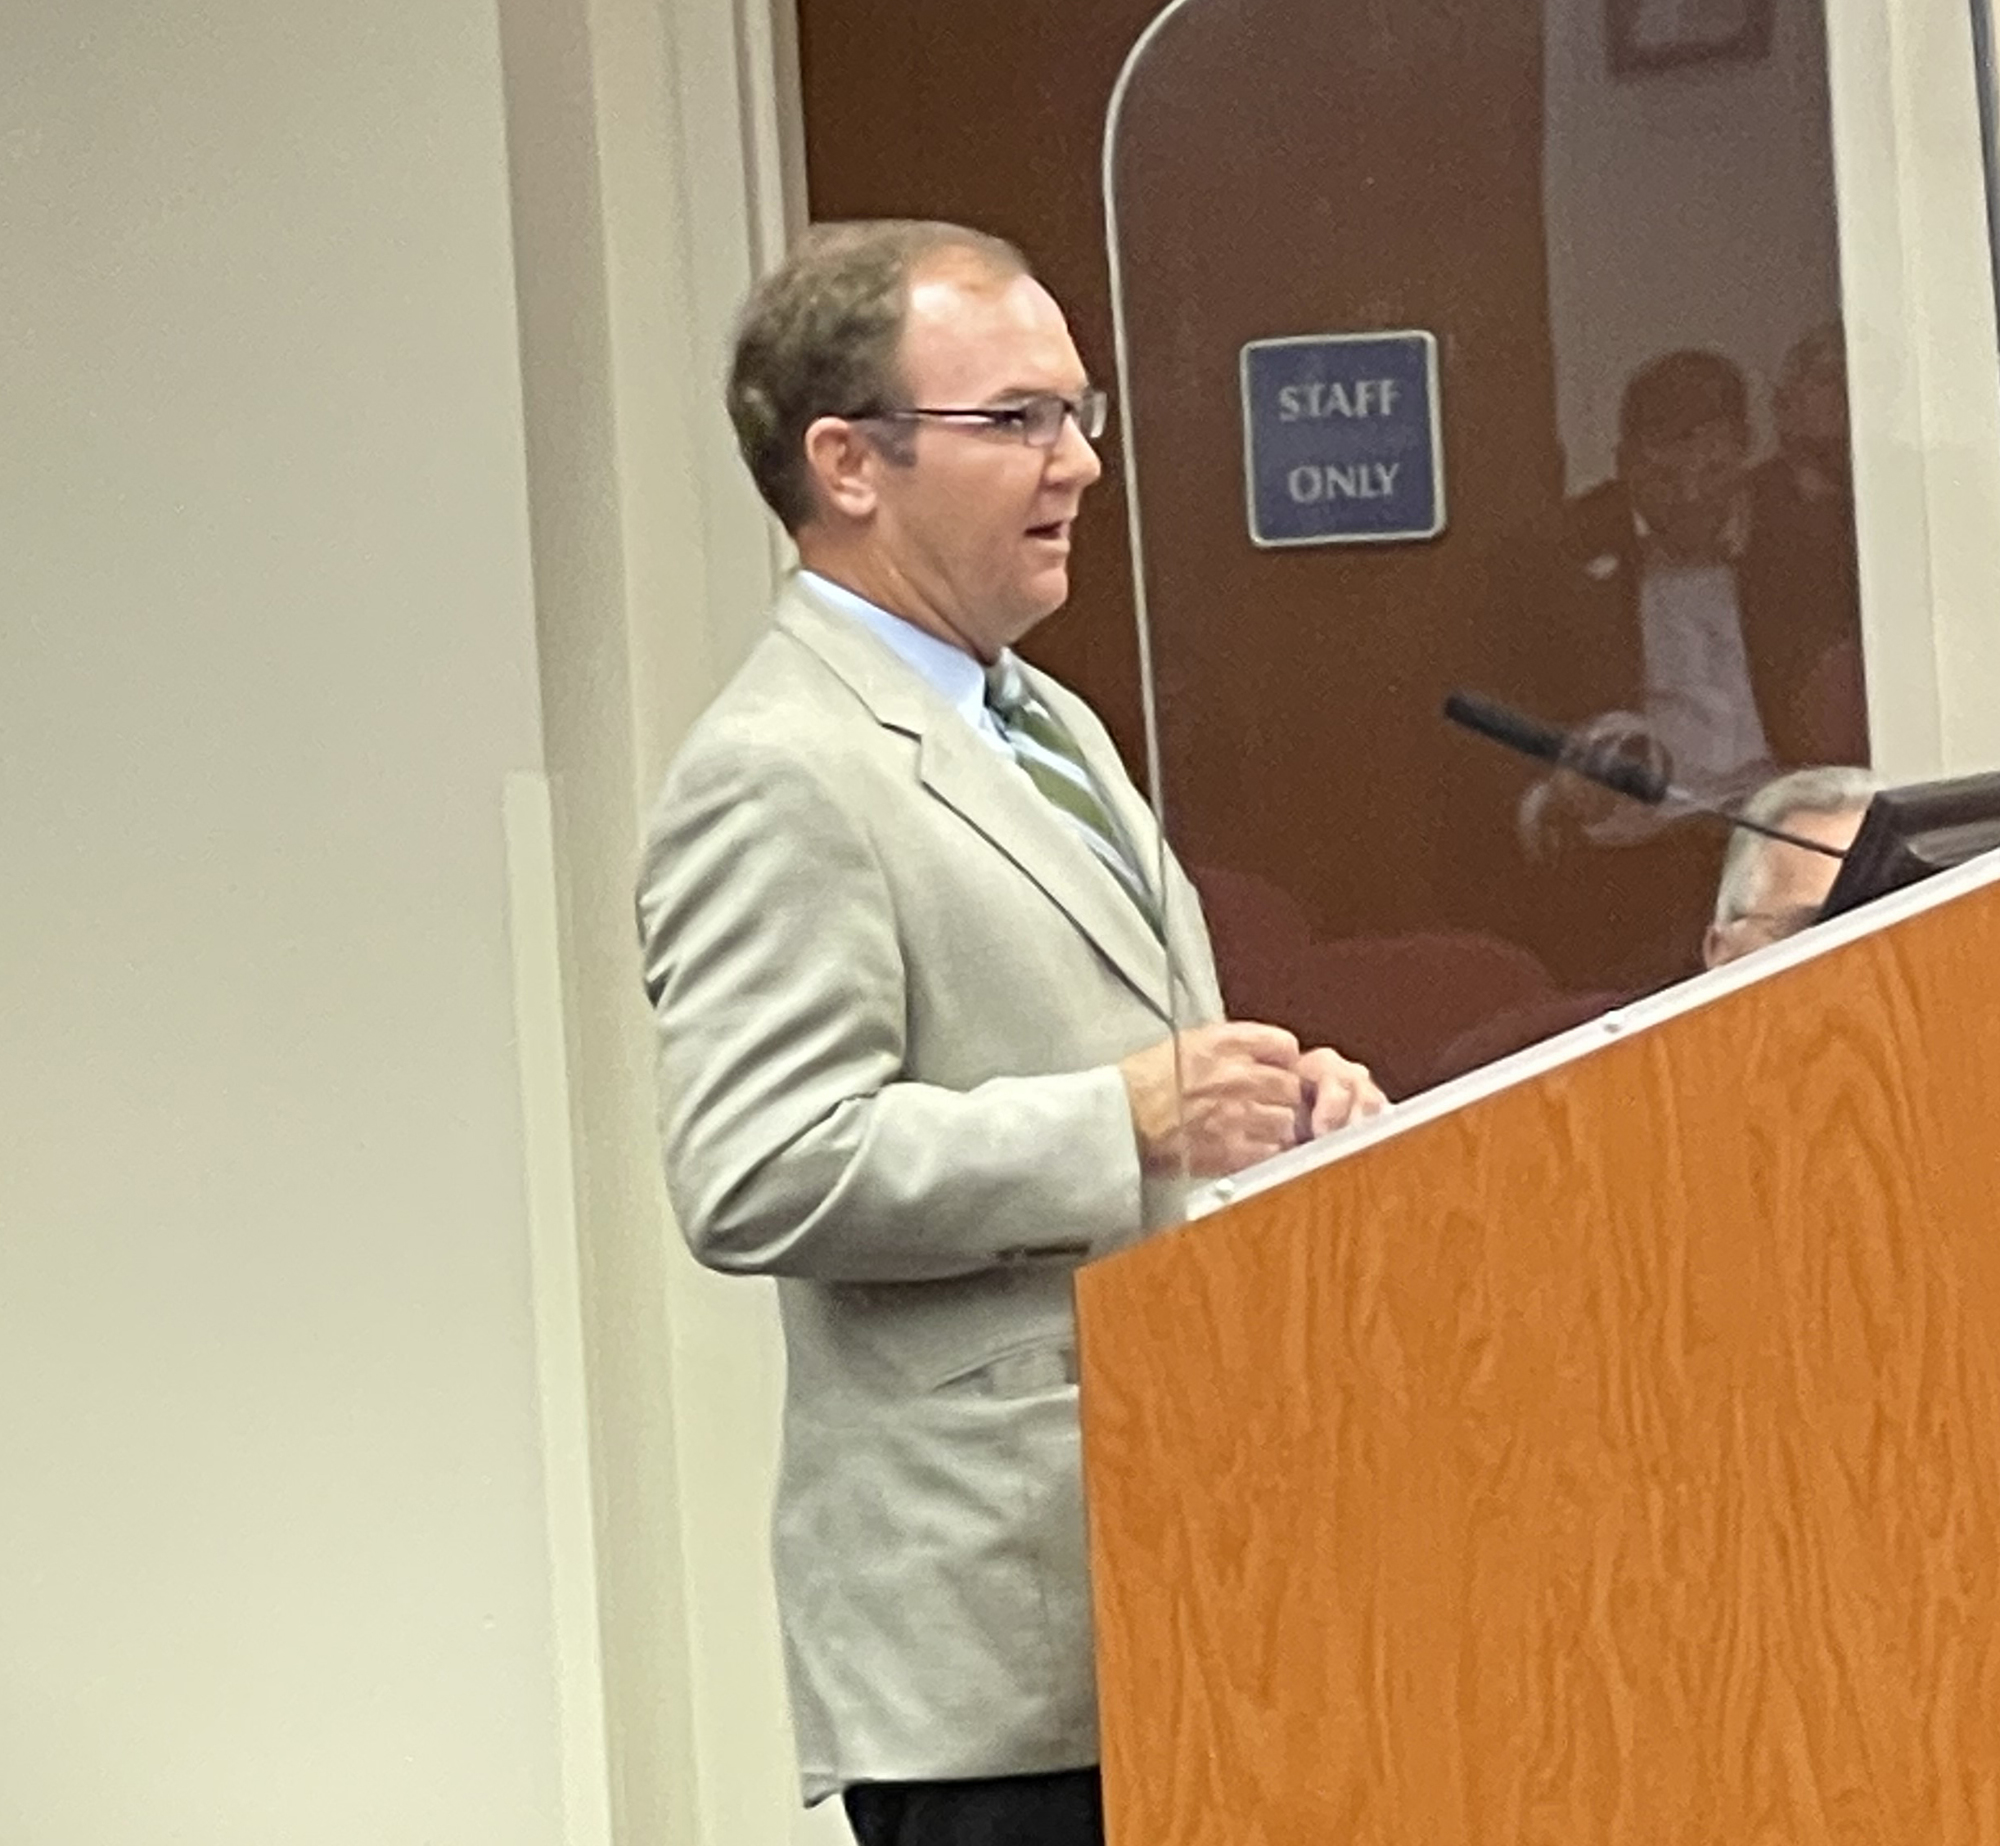 Jeff Wright, an attorney representing CitySwitch, explains the benefits of a proposed 150-foot cell tower to the Manatee County Commission on Dec. 2. It will be constructed on the southeast corner of Lorraine Road and S.R. 64.